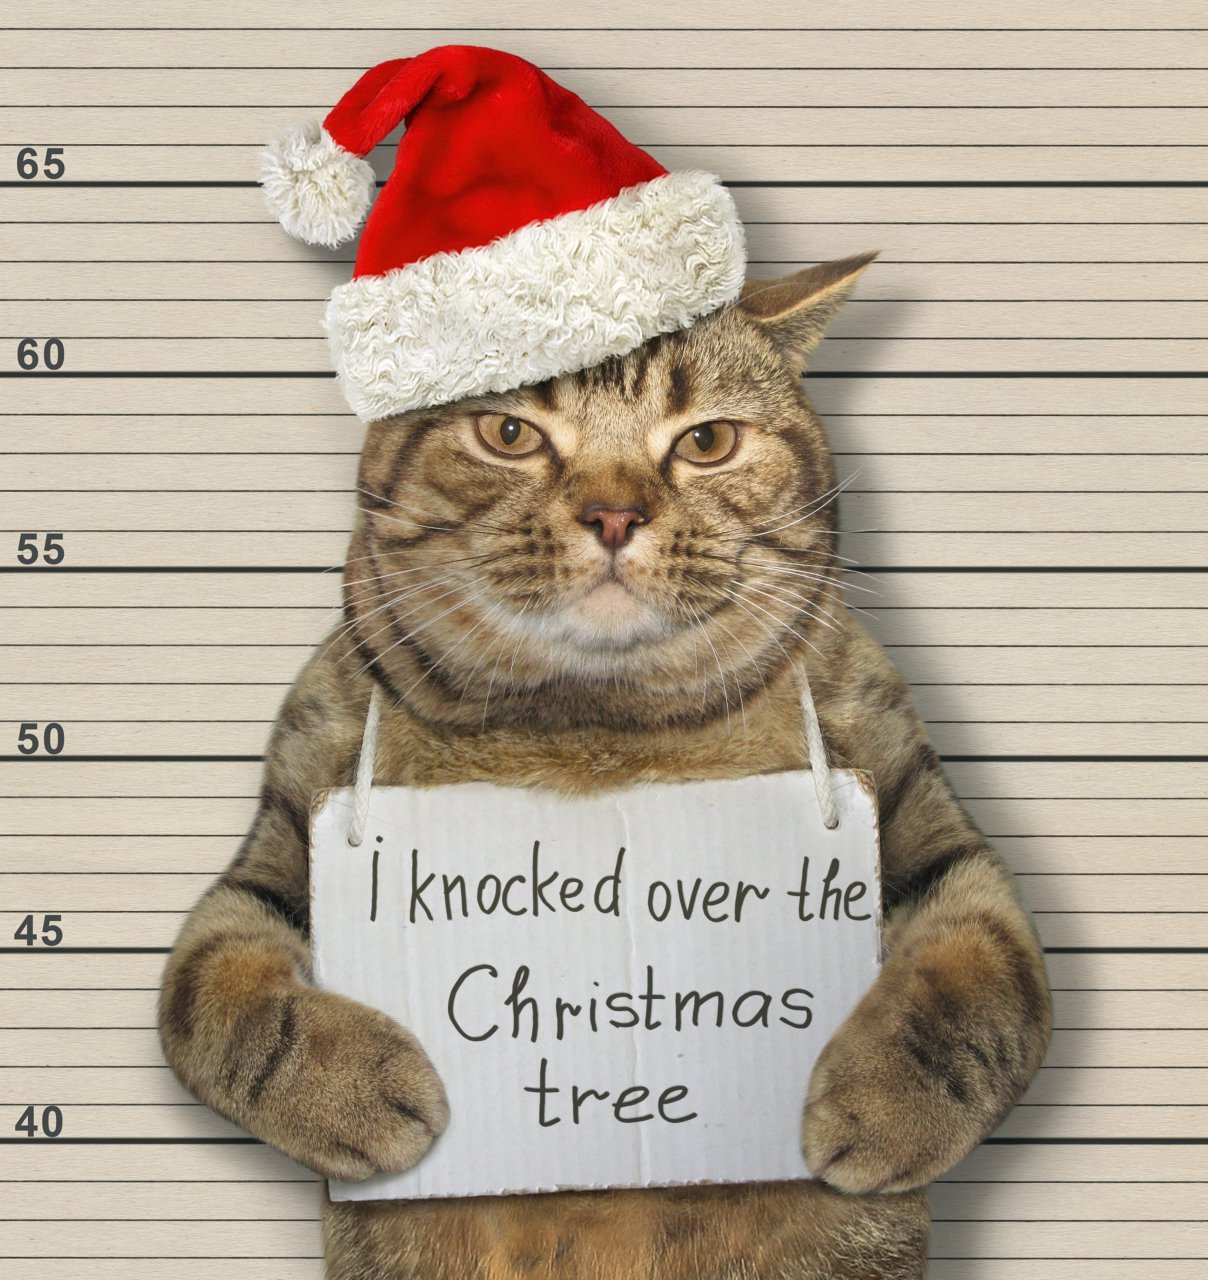 Cat accused of destroying the Christmas tree